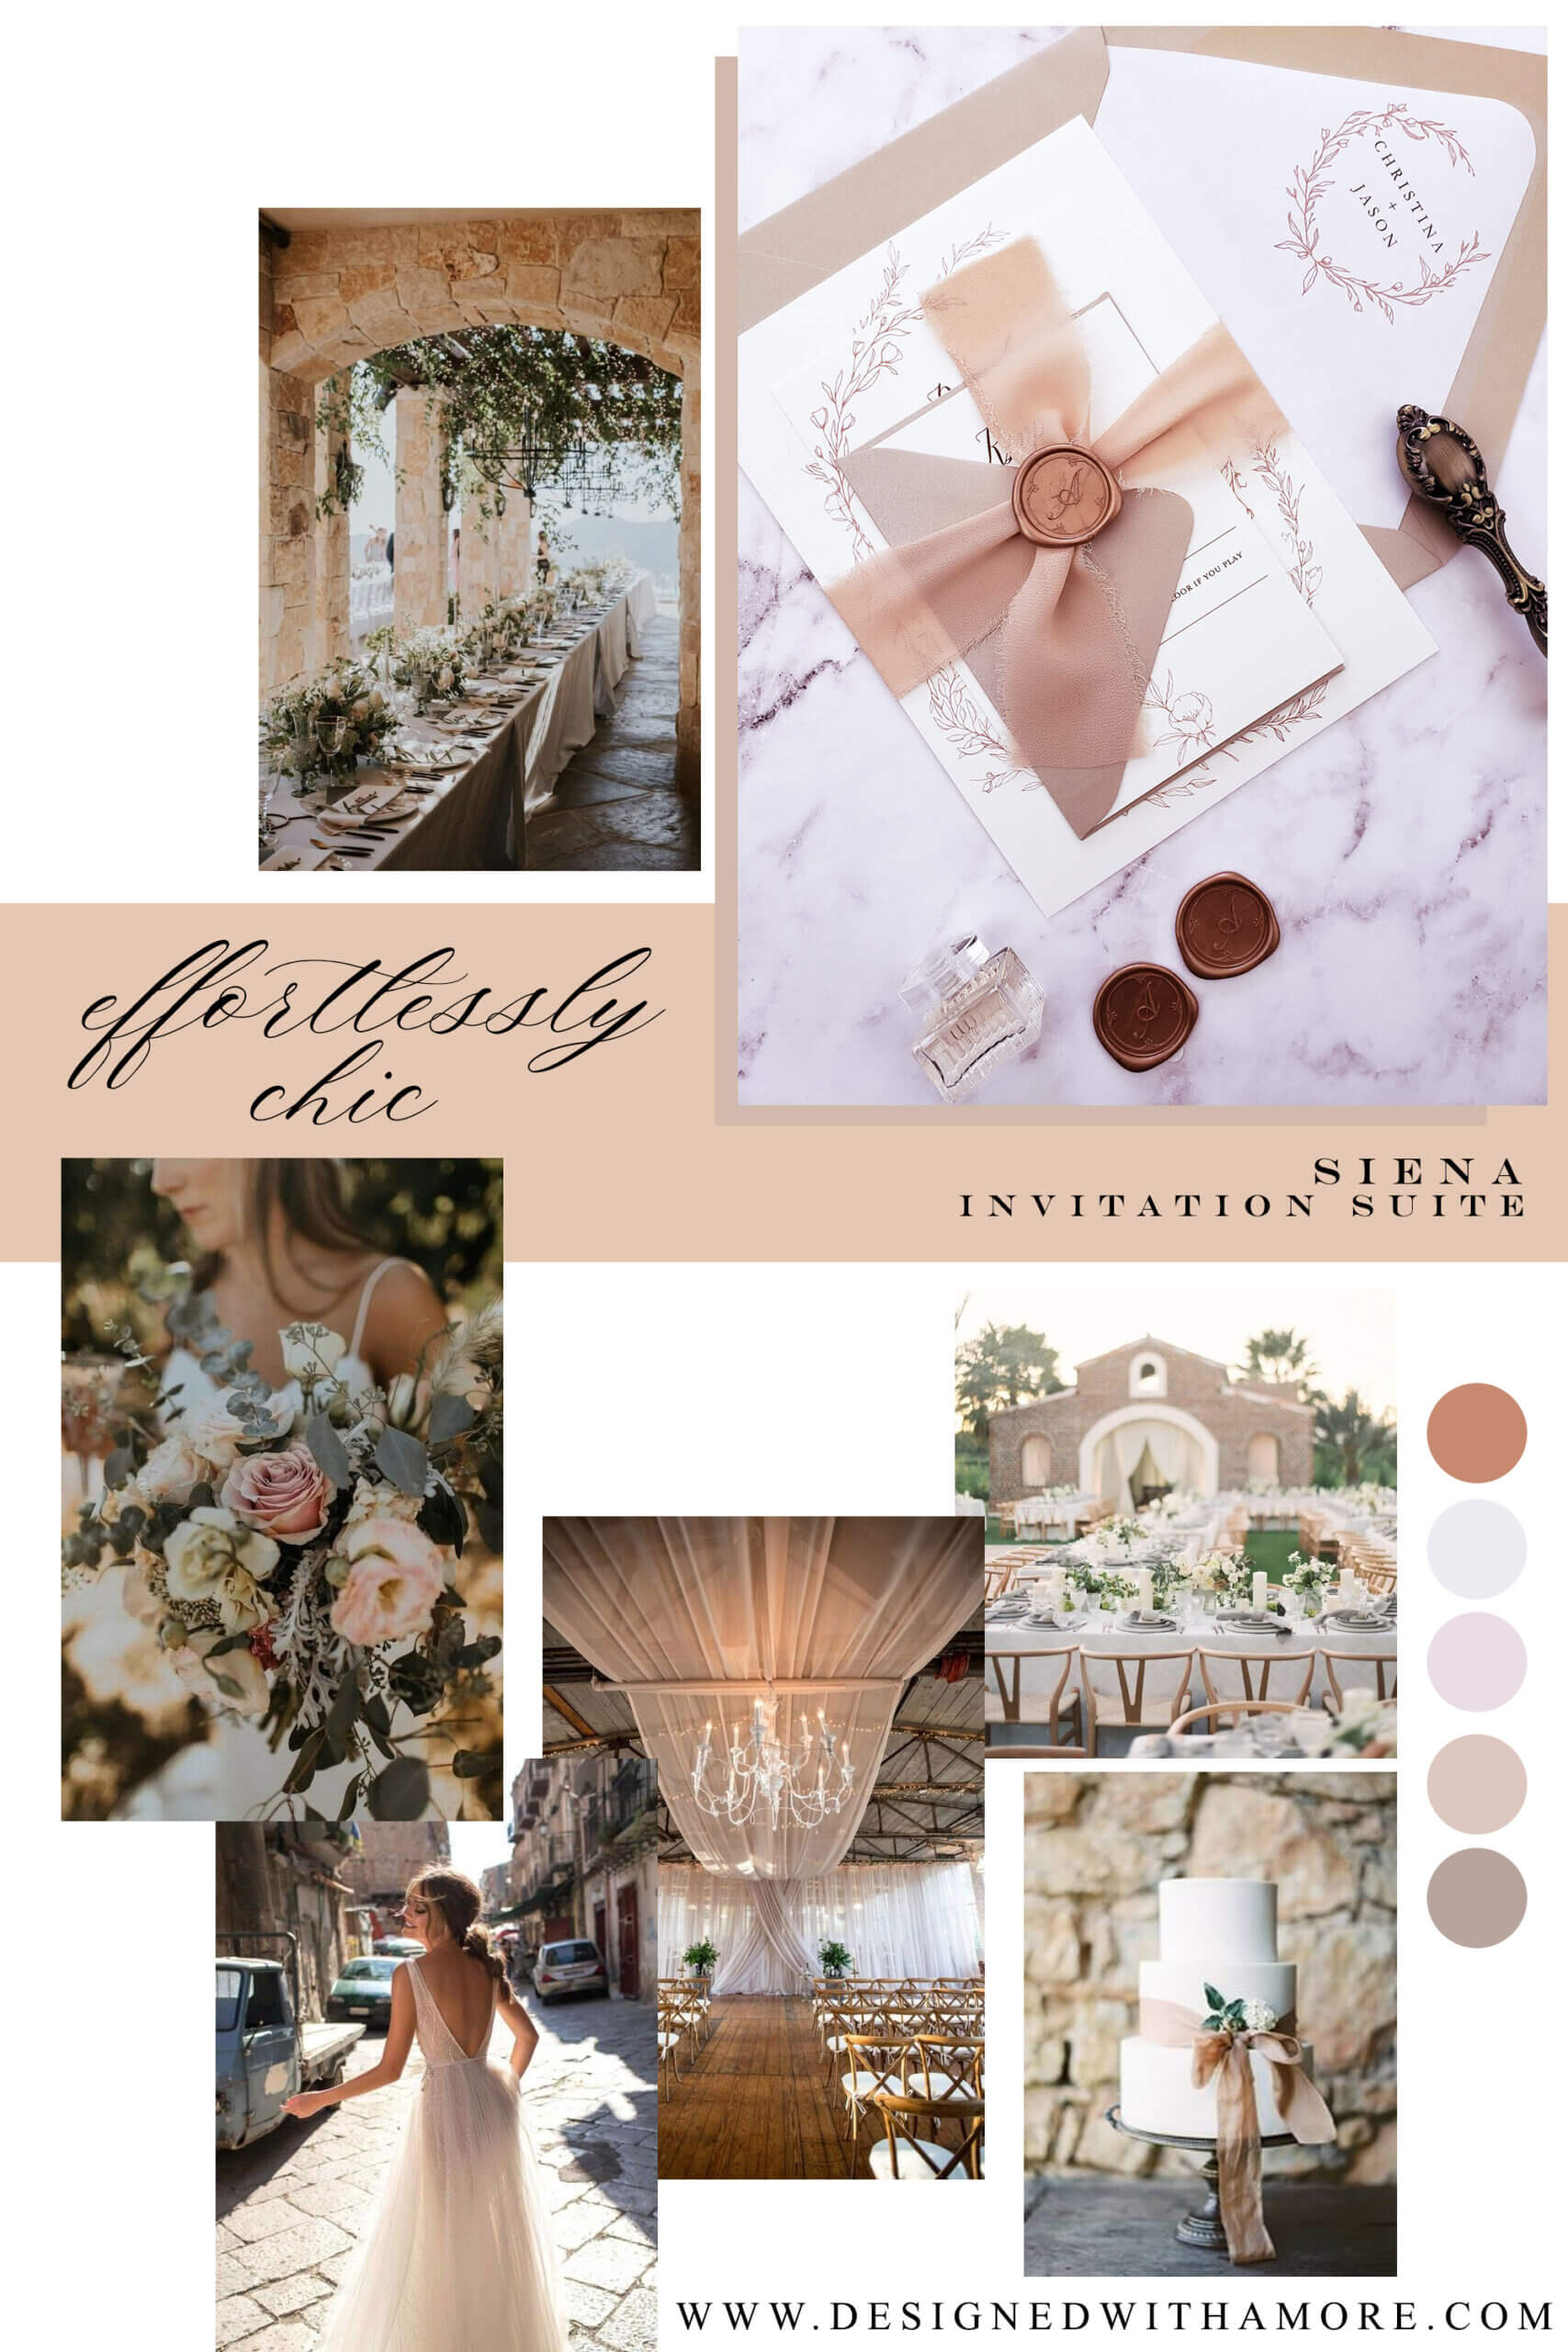 A collage of wedding invitations, venues, and cake